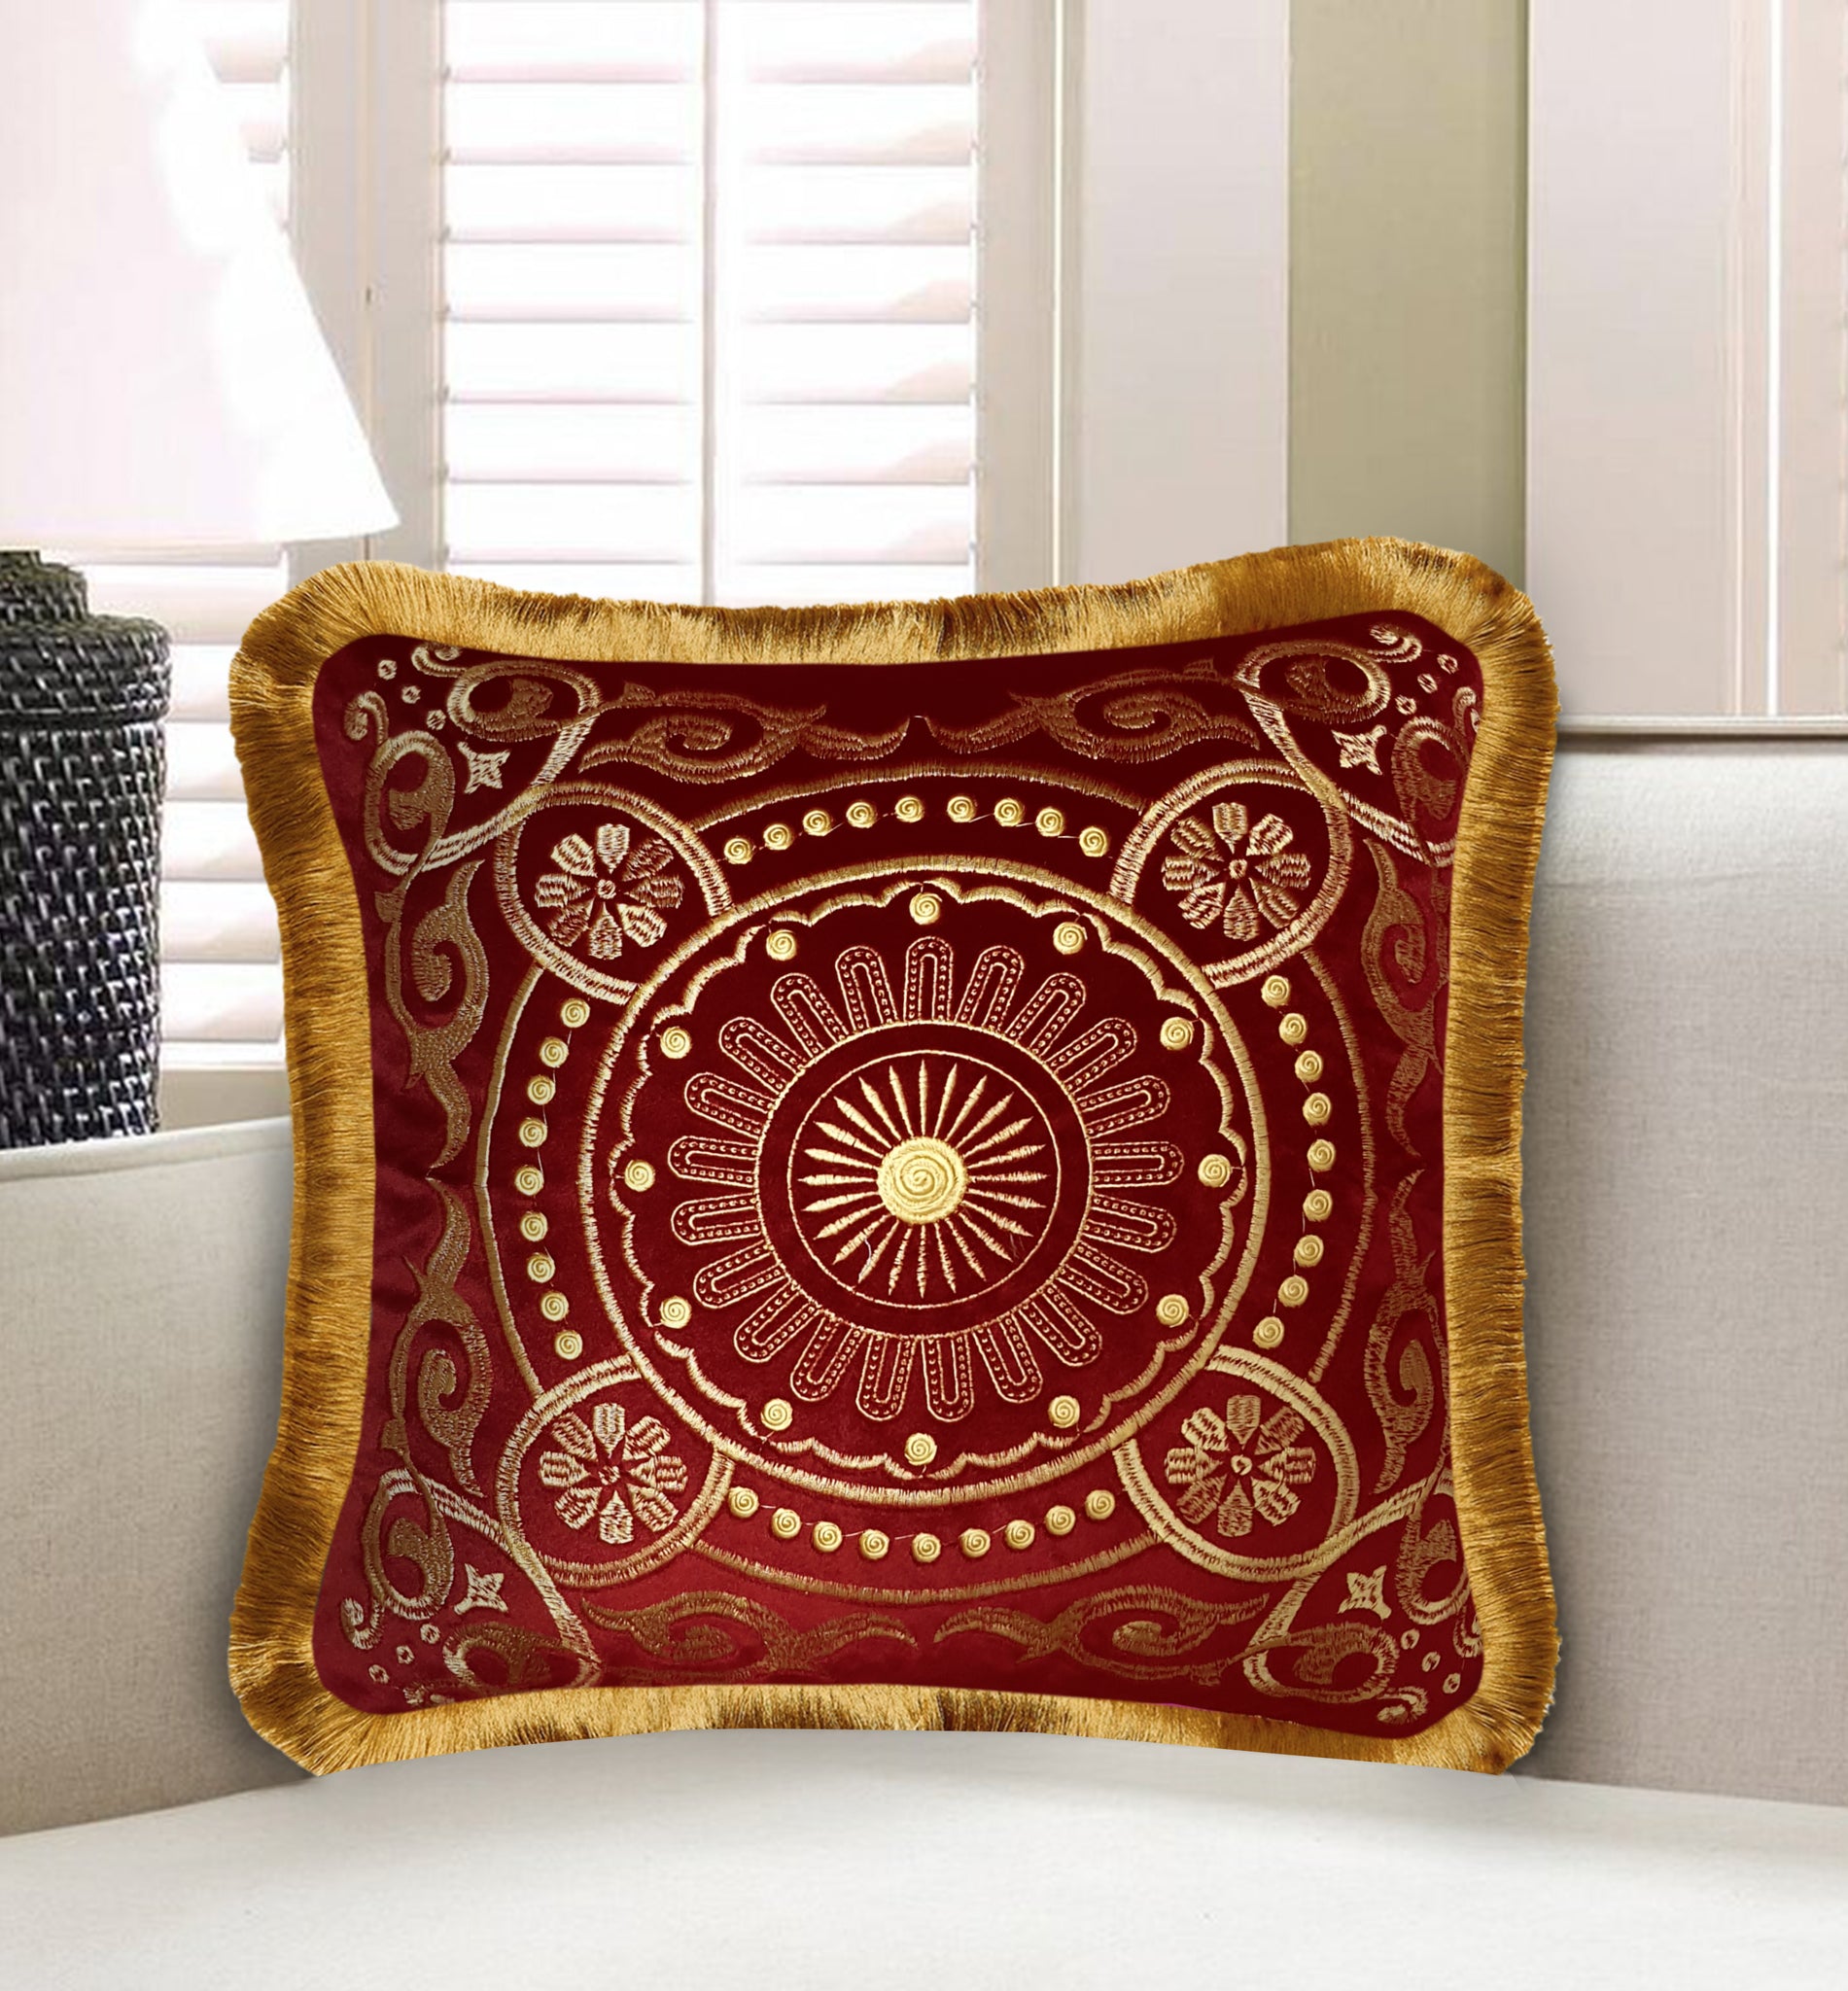 Velvet Cushion Cover Embroidery Baroque Motif Decorative Pillow European Style Home Decor Throw Pillow for Sofa Chair Living Room 45x45 cm 18x18 In